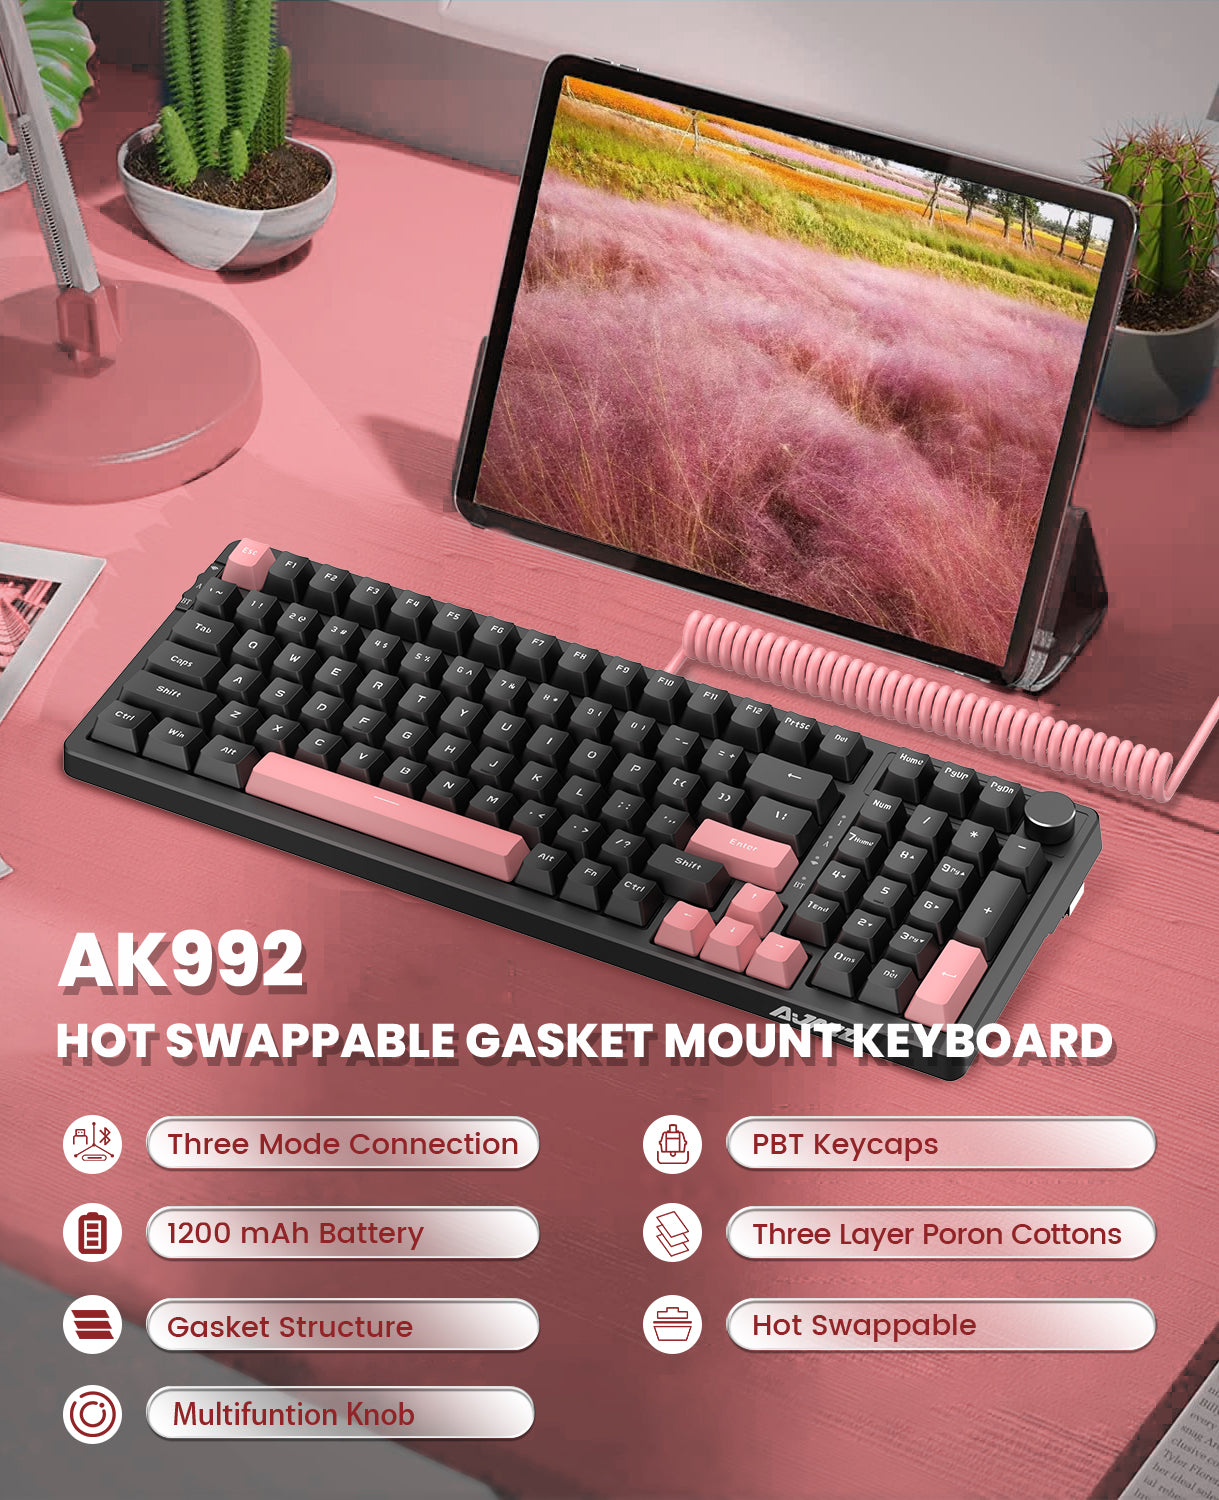 AJAZZ 96% Hot-swappable Gasket Mechanical Gaming Keyboard with Custom Coiled USB C Cable, 1400 mAh Triple Mode 2.4G/BT5.1/ Wired 99Keys with Knob